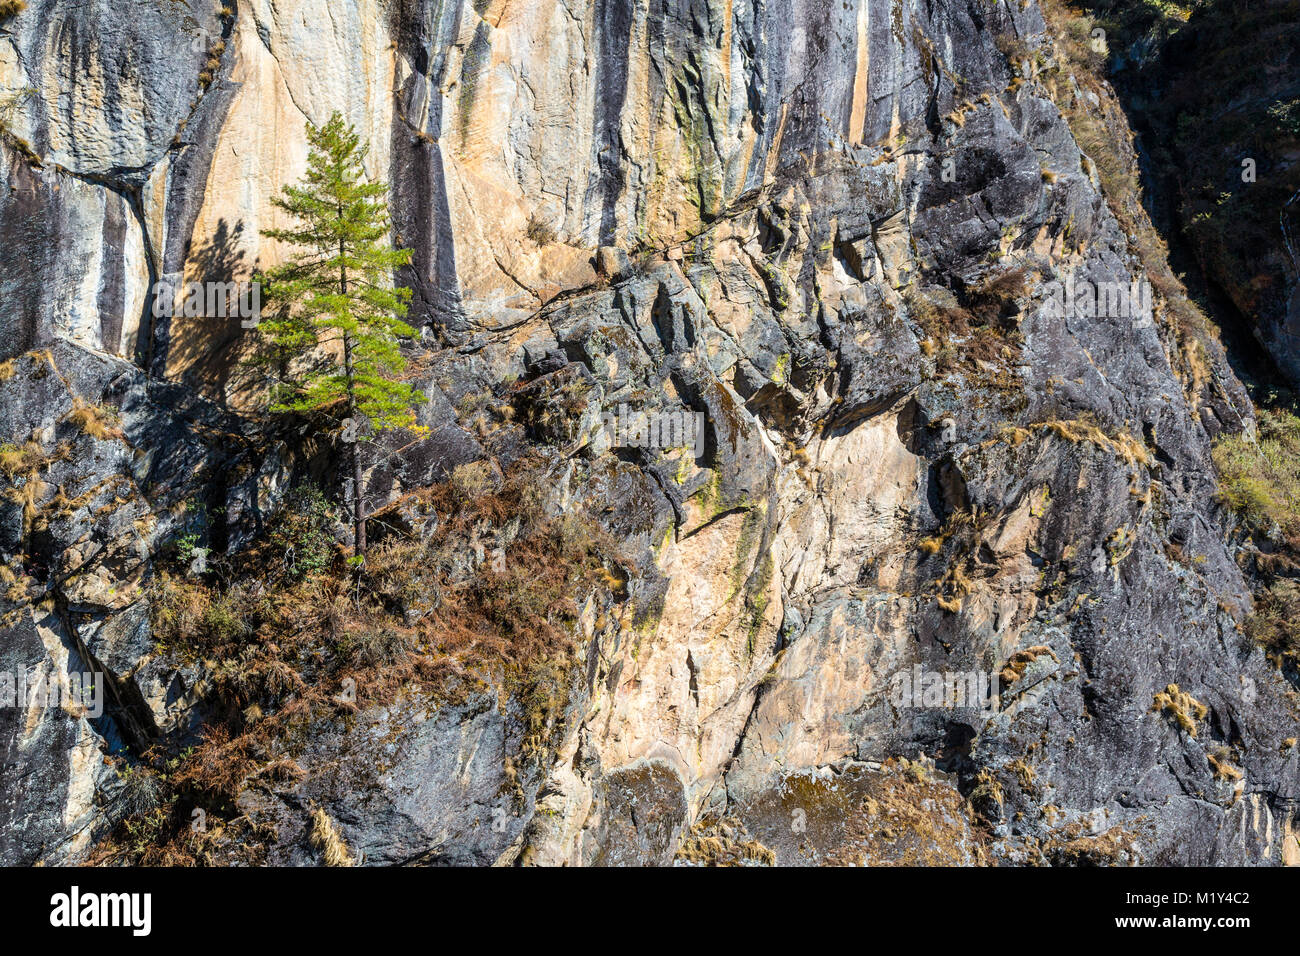 Paro, Bhutan.  Precarious Existence.  Tree Growing on Outcropping of Cliff face, near the Tiger's Nest Monastery. Stock Photo